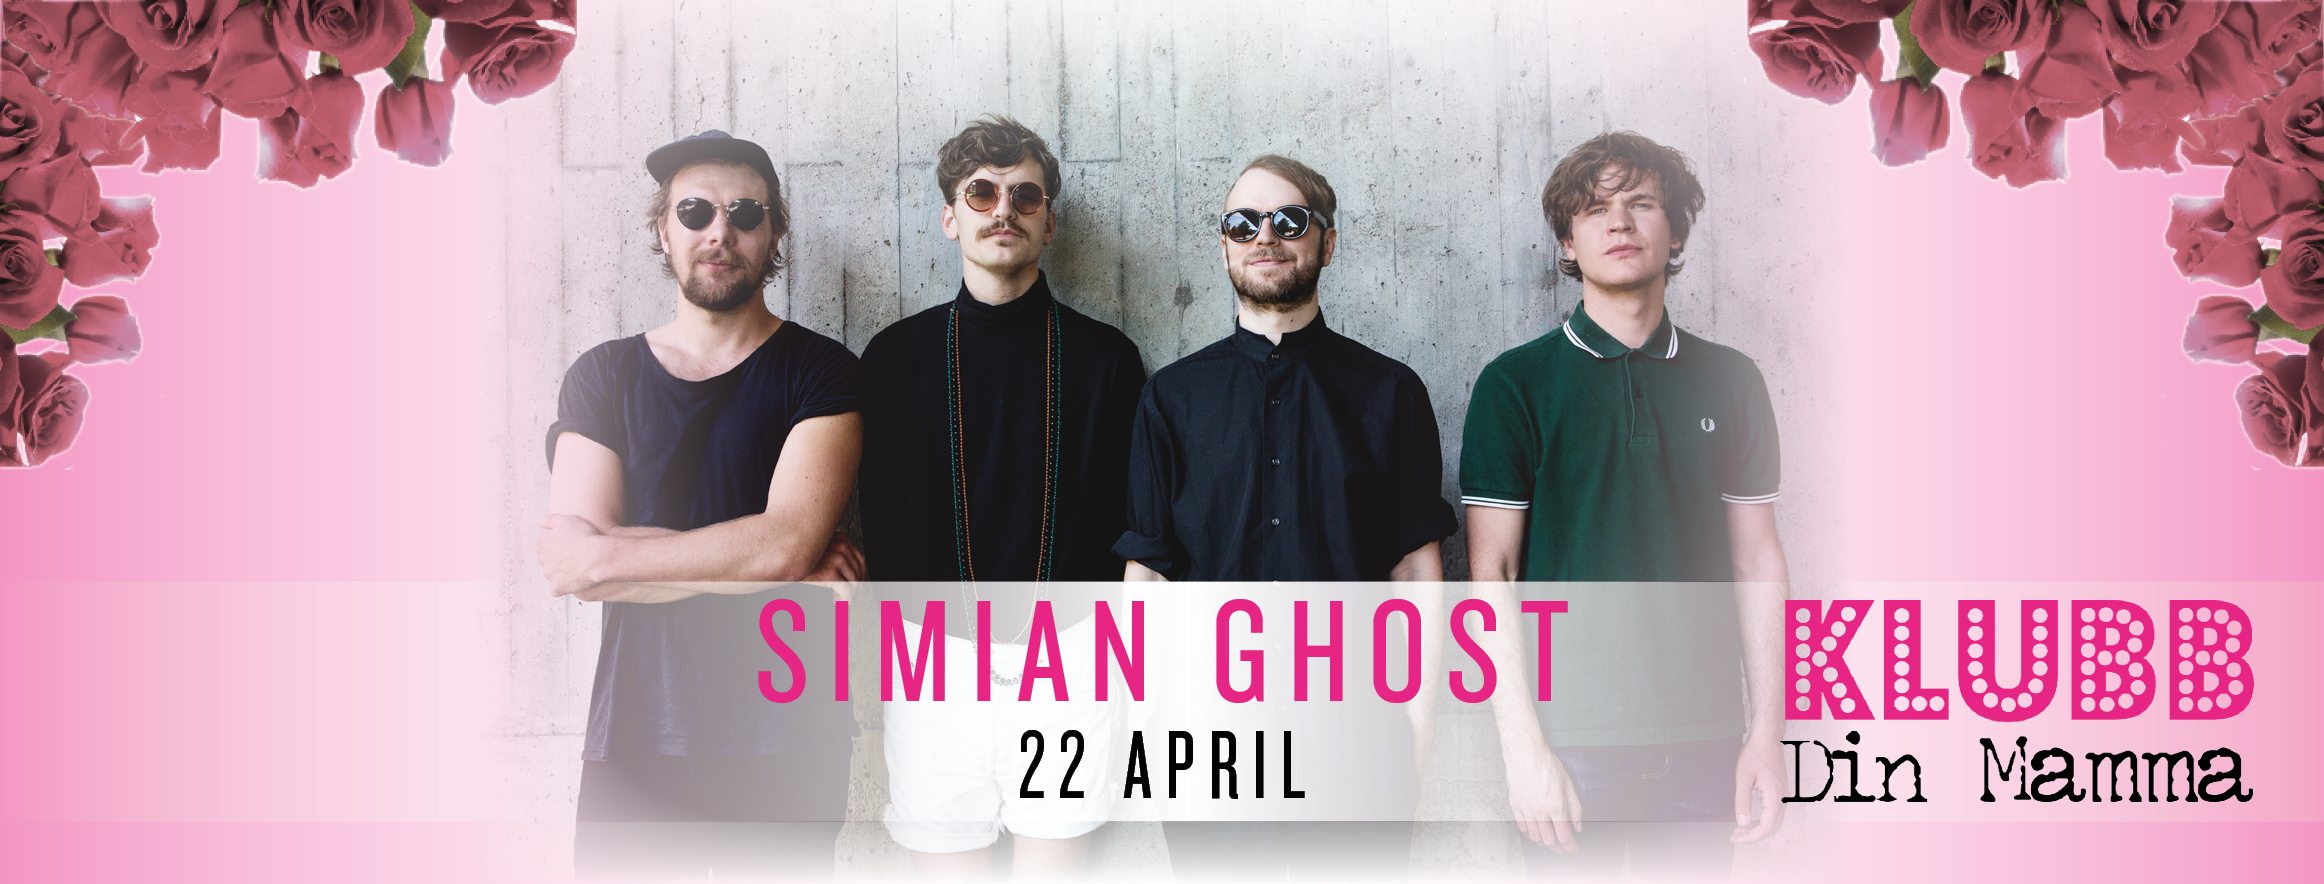 Simian Ghost - 22 april